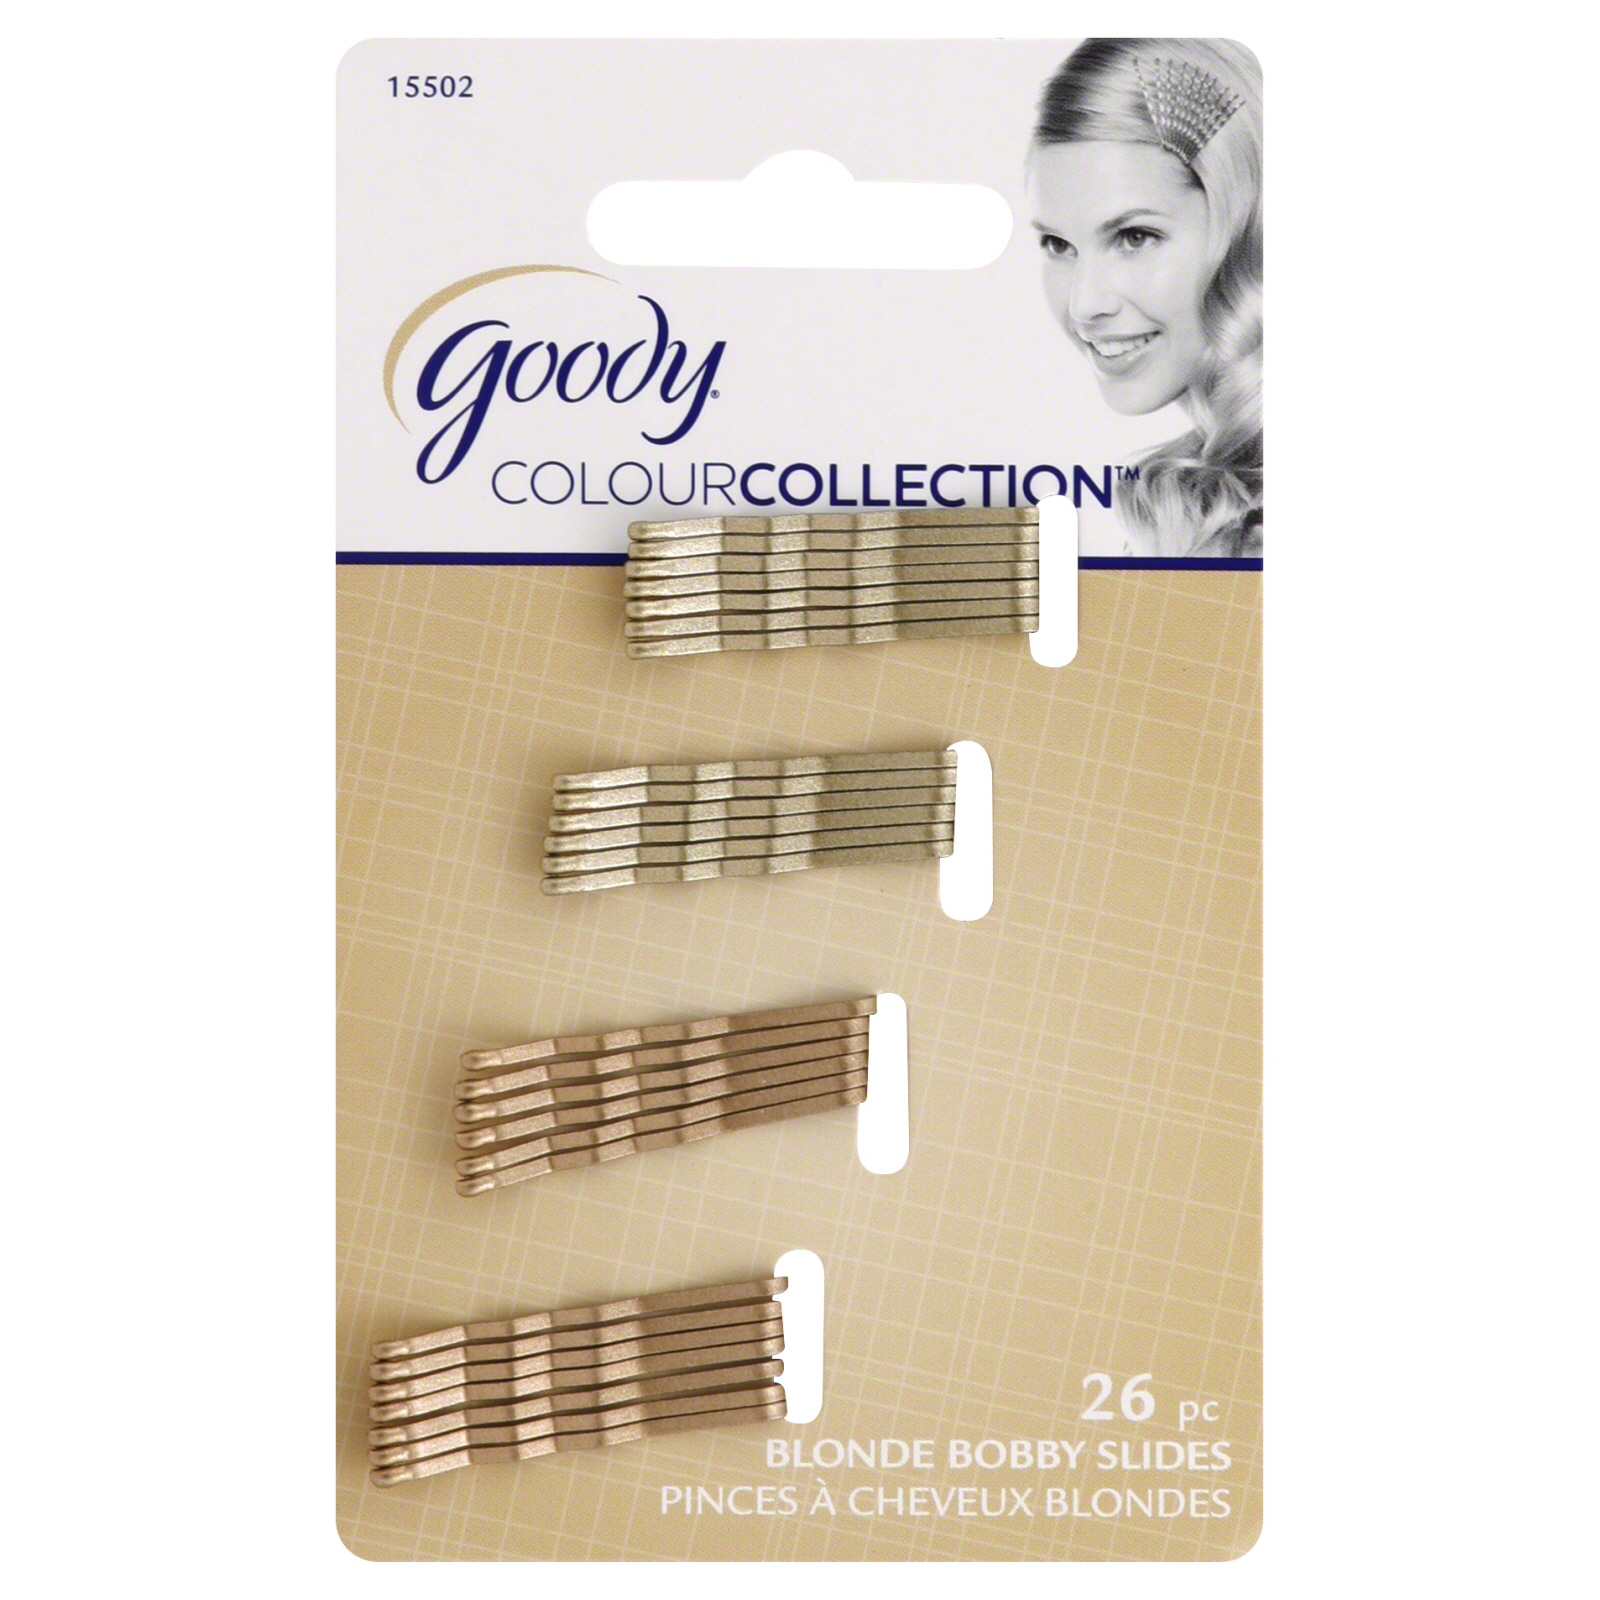 UPC 041457155028 product image for Goody Colour Collection Small Metallic Bobby Slide, Blonde, 26 CT | upcitemdb.com